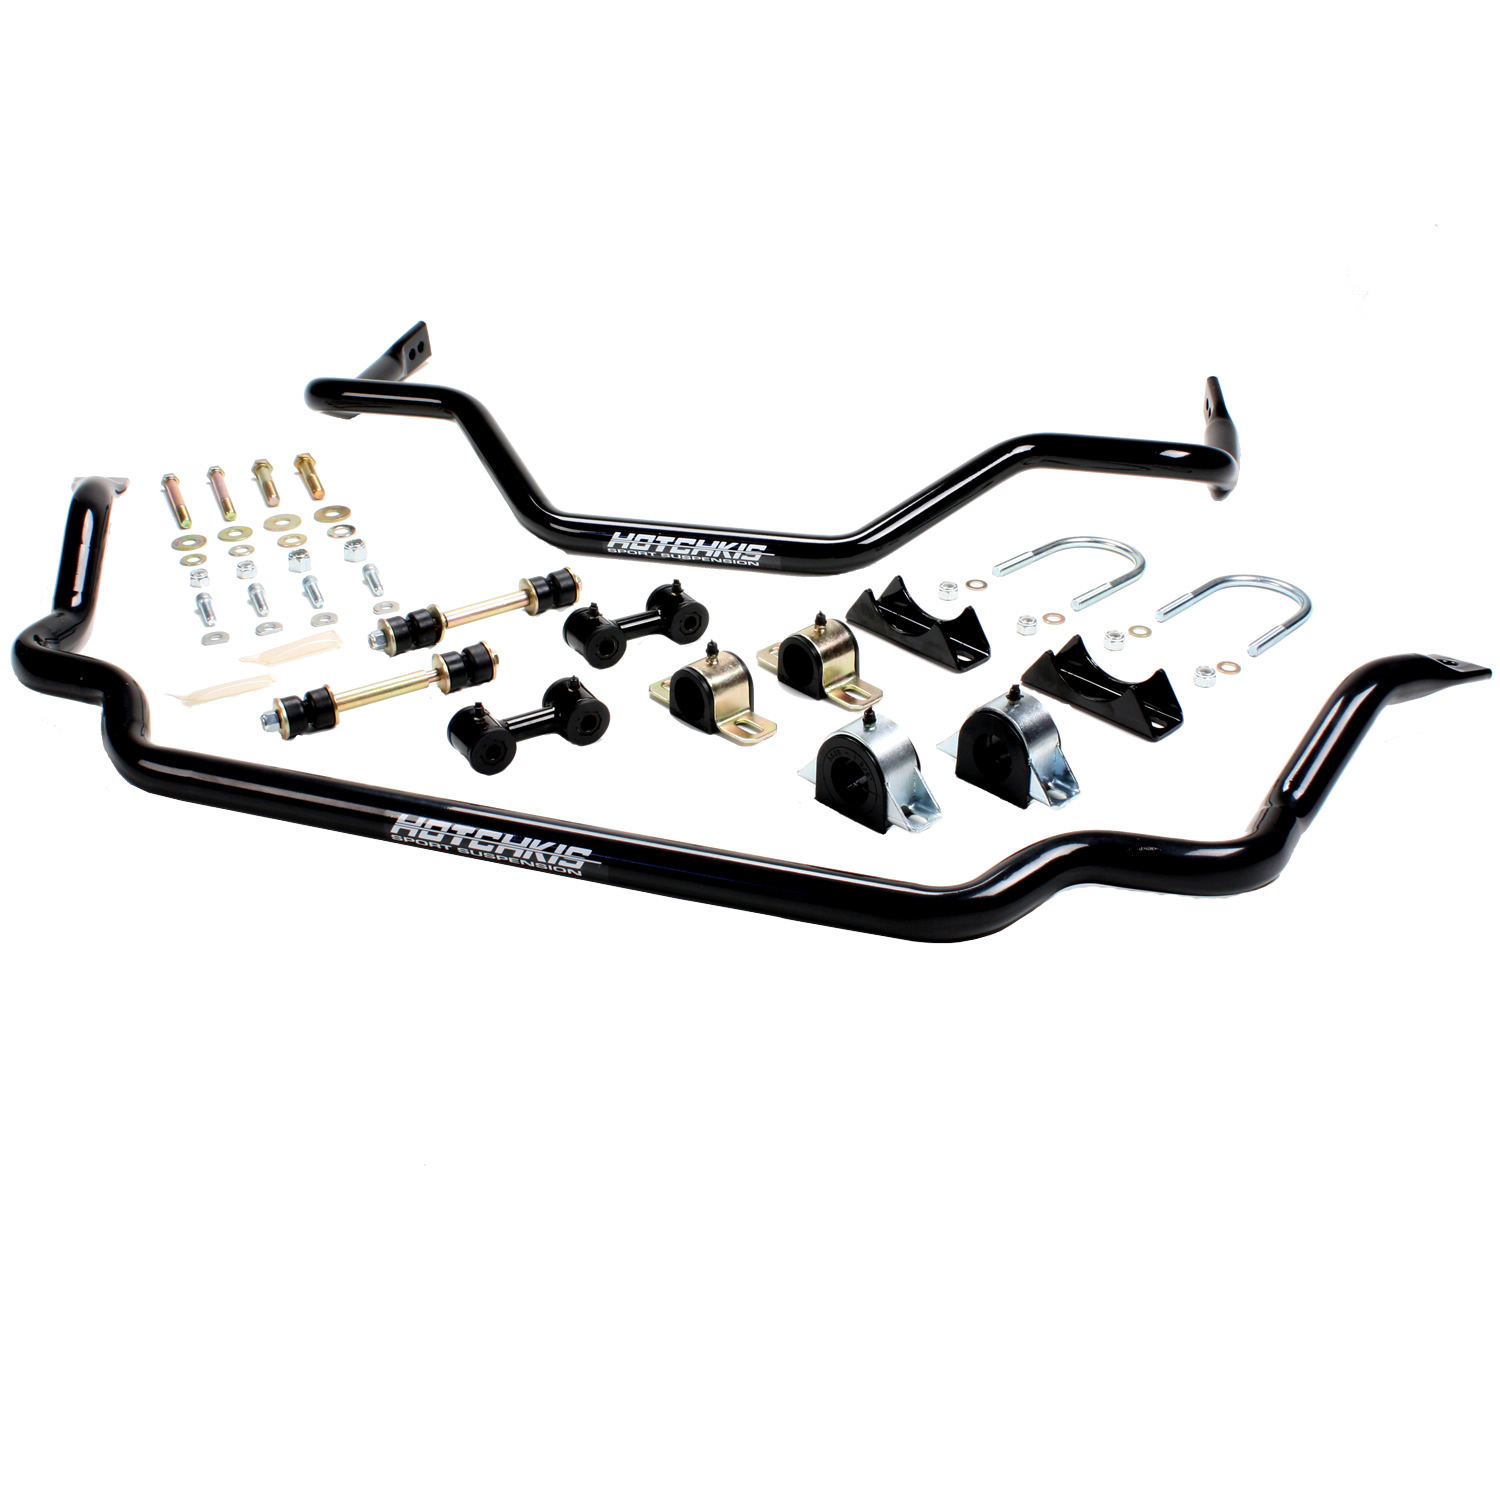 1964-1972 GM A-Body Extreme Sway Bar Set from Hotchkis Sport Suspension